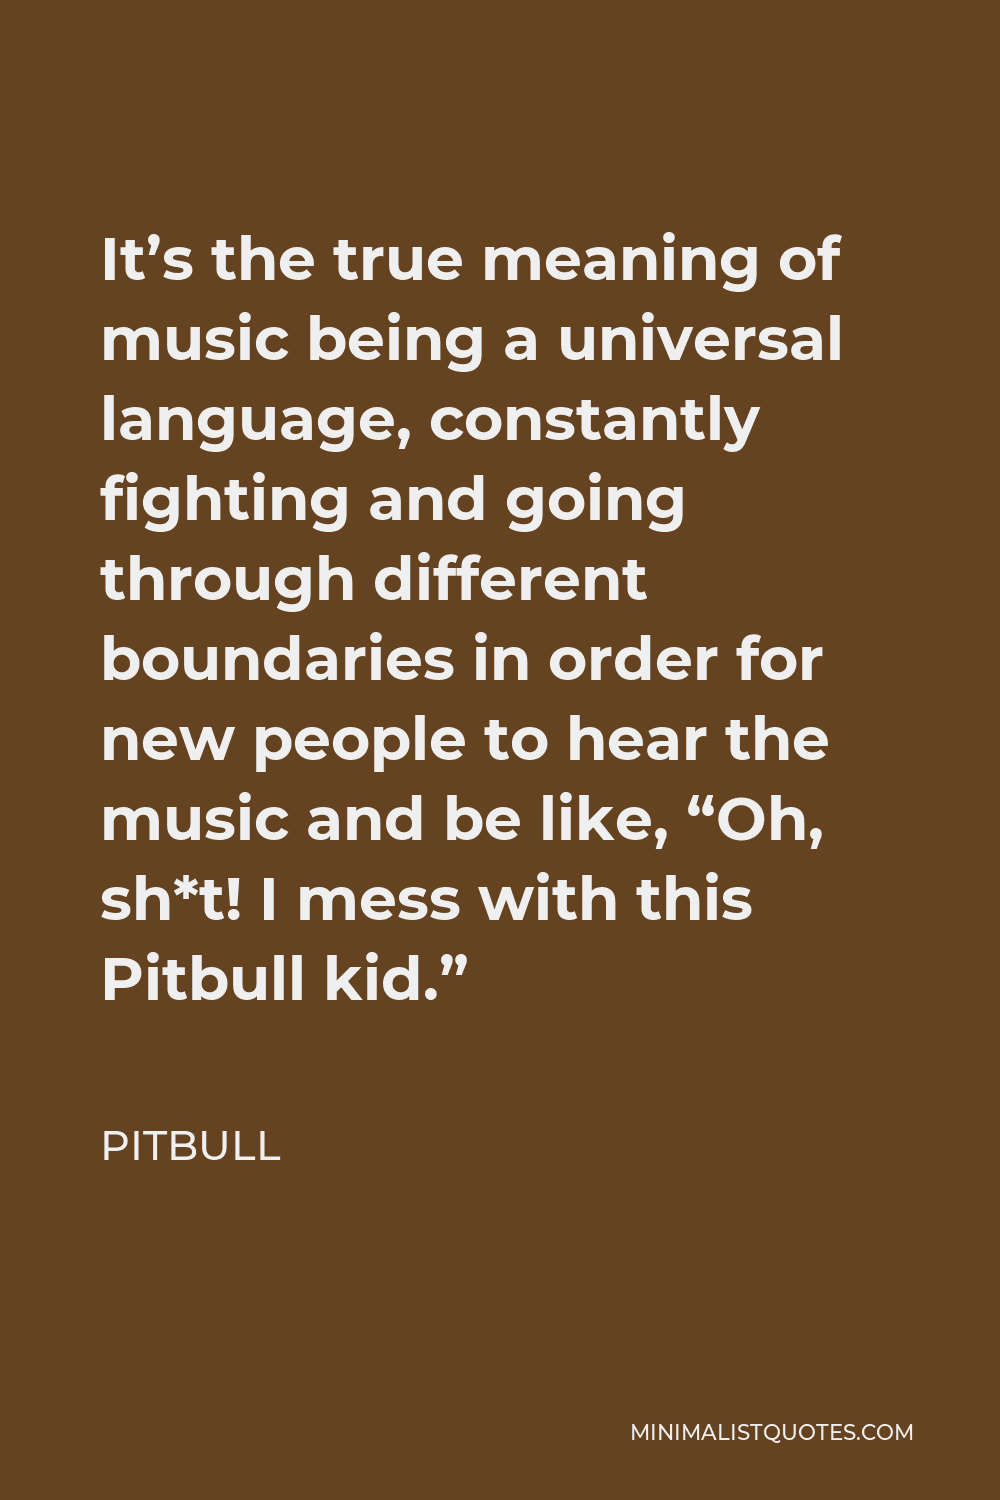 Pitbull Quote - It’s the true meaning of music being a universal language, constantly fighting and going through different boundaries in order for new people to hear the music and be like, “Oh, sh*t! I mess with this Pitbull kid.”